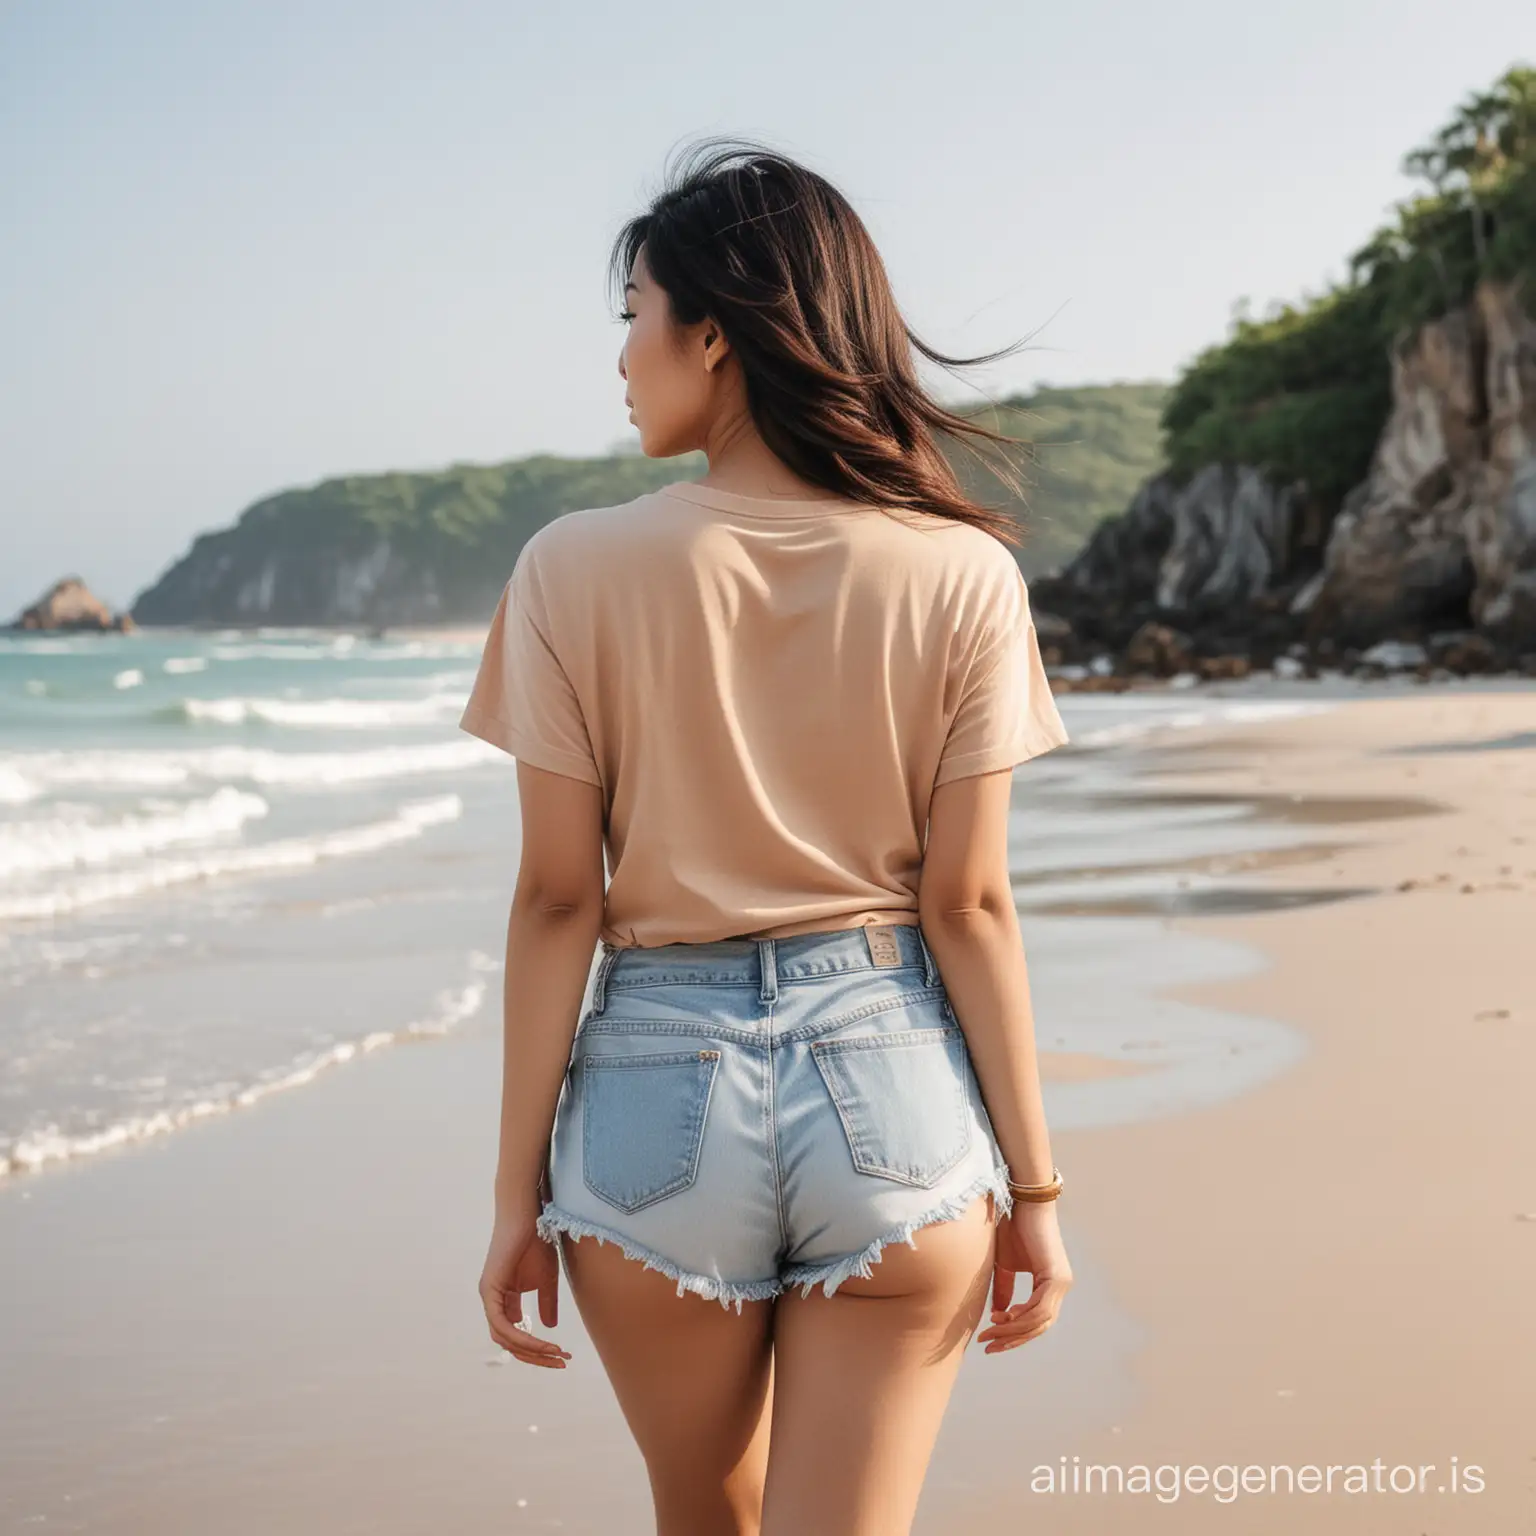 The back view of an Asian woman walking on the beach in a T-shirt and shorts.